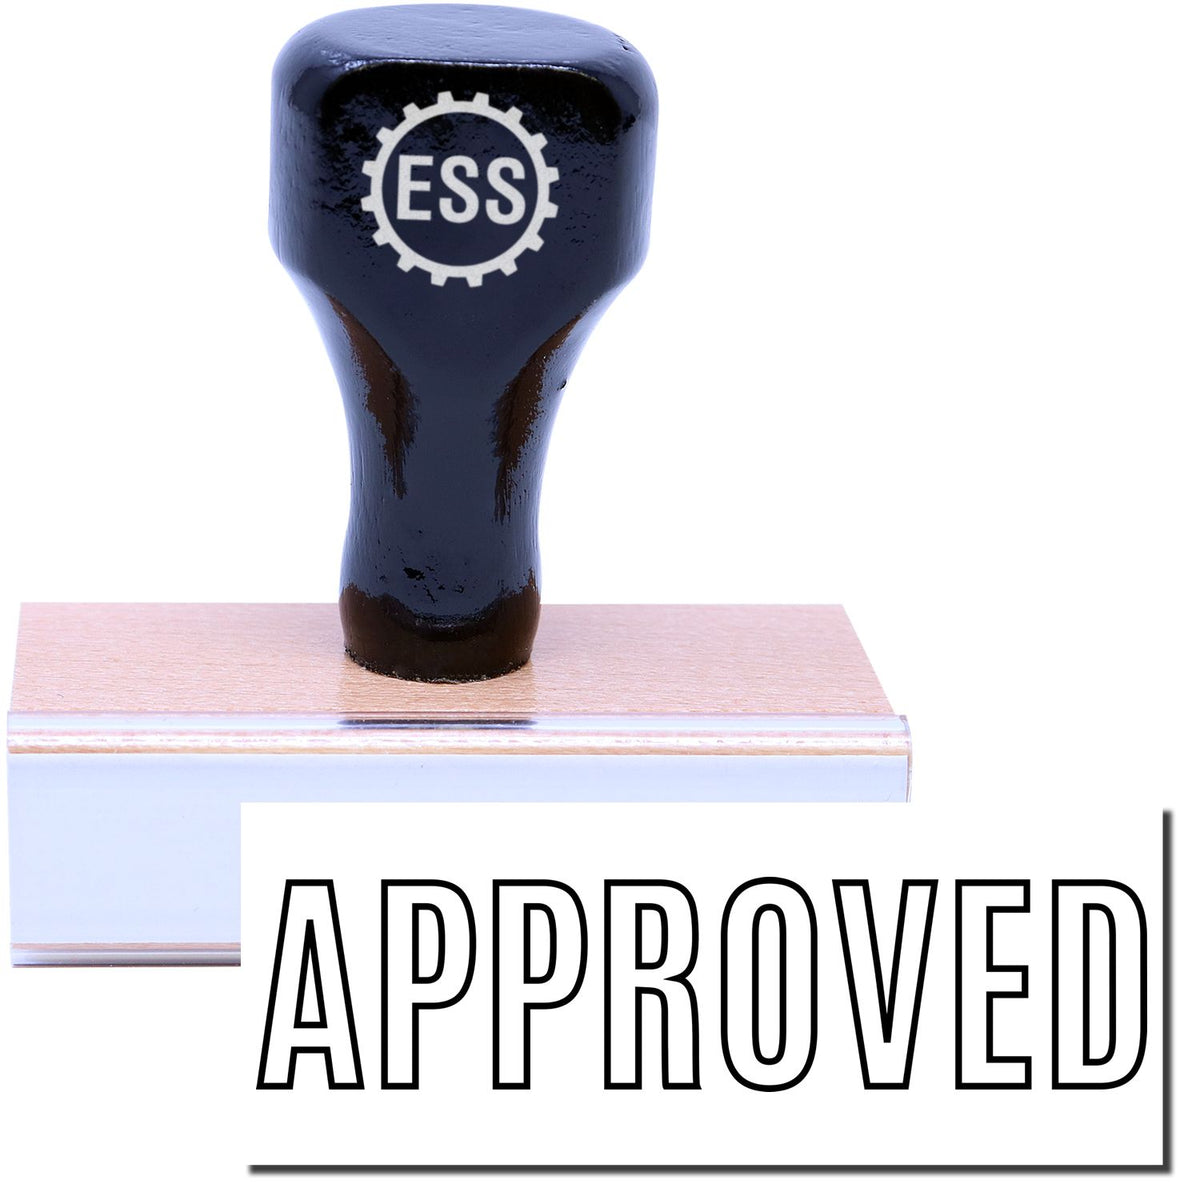 A stock office rubber stamp with a stamped image showing how the text &quot;APPROVED&quot; in a large outline font is displayed after stamping.